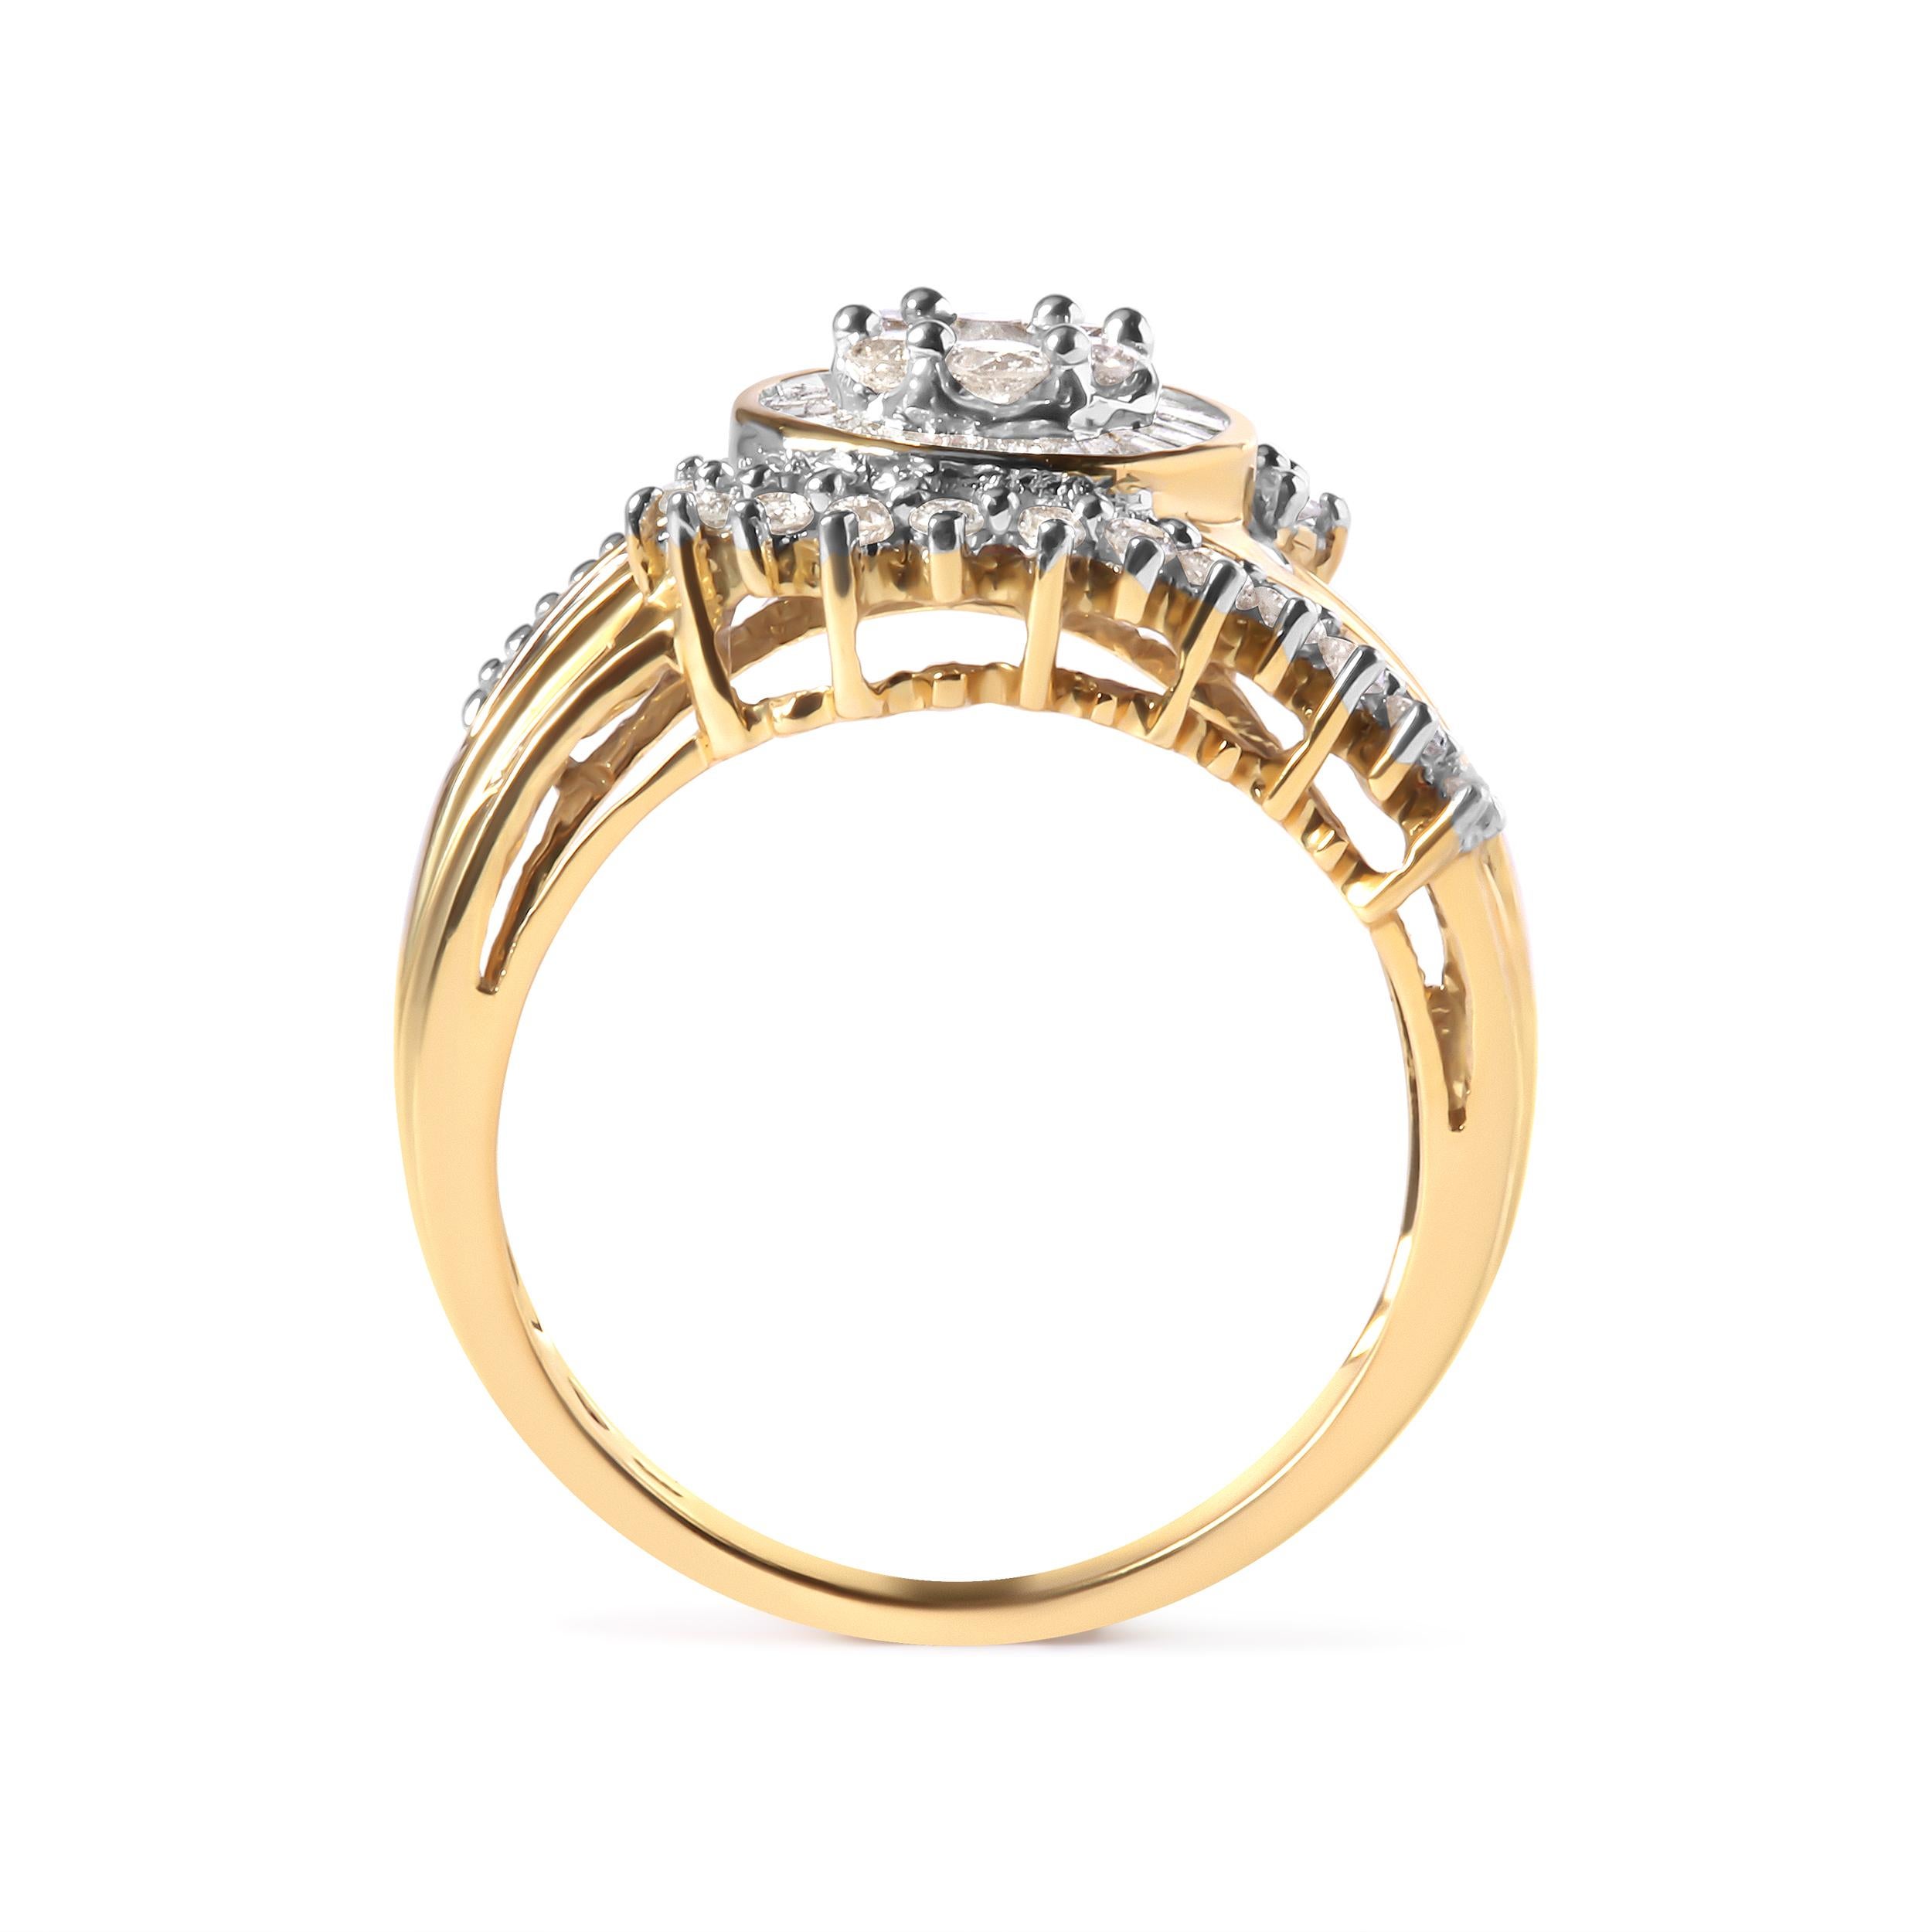 Indulge in the luxurious beauty of our stunning diamond cluster swirl band ring. Crafted from 10K yellow gold, this modern band is the perfect accessory to elevate any outfit. With a dazzling 1 cttw of natural diamonds in round and baguette cuts,